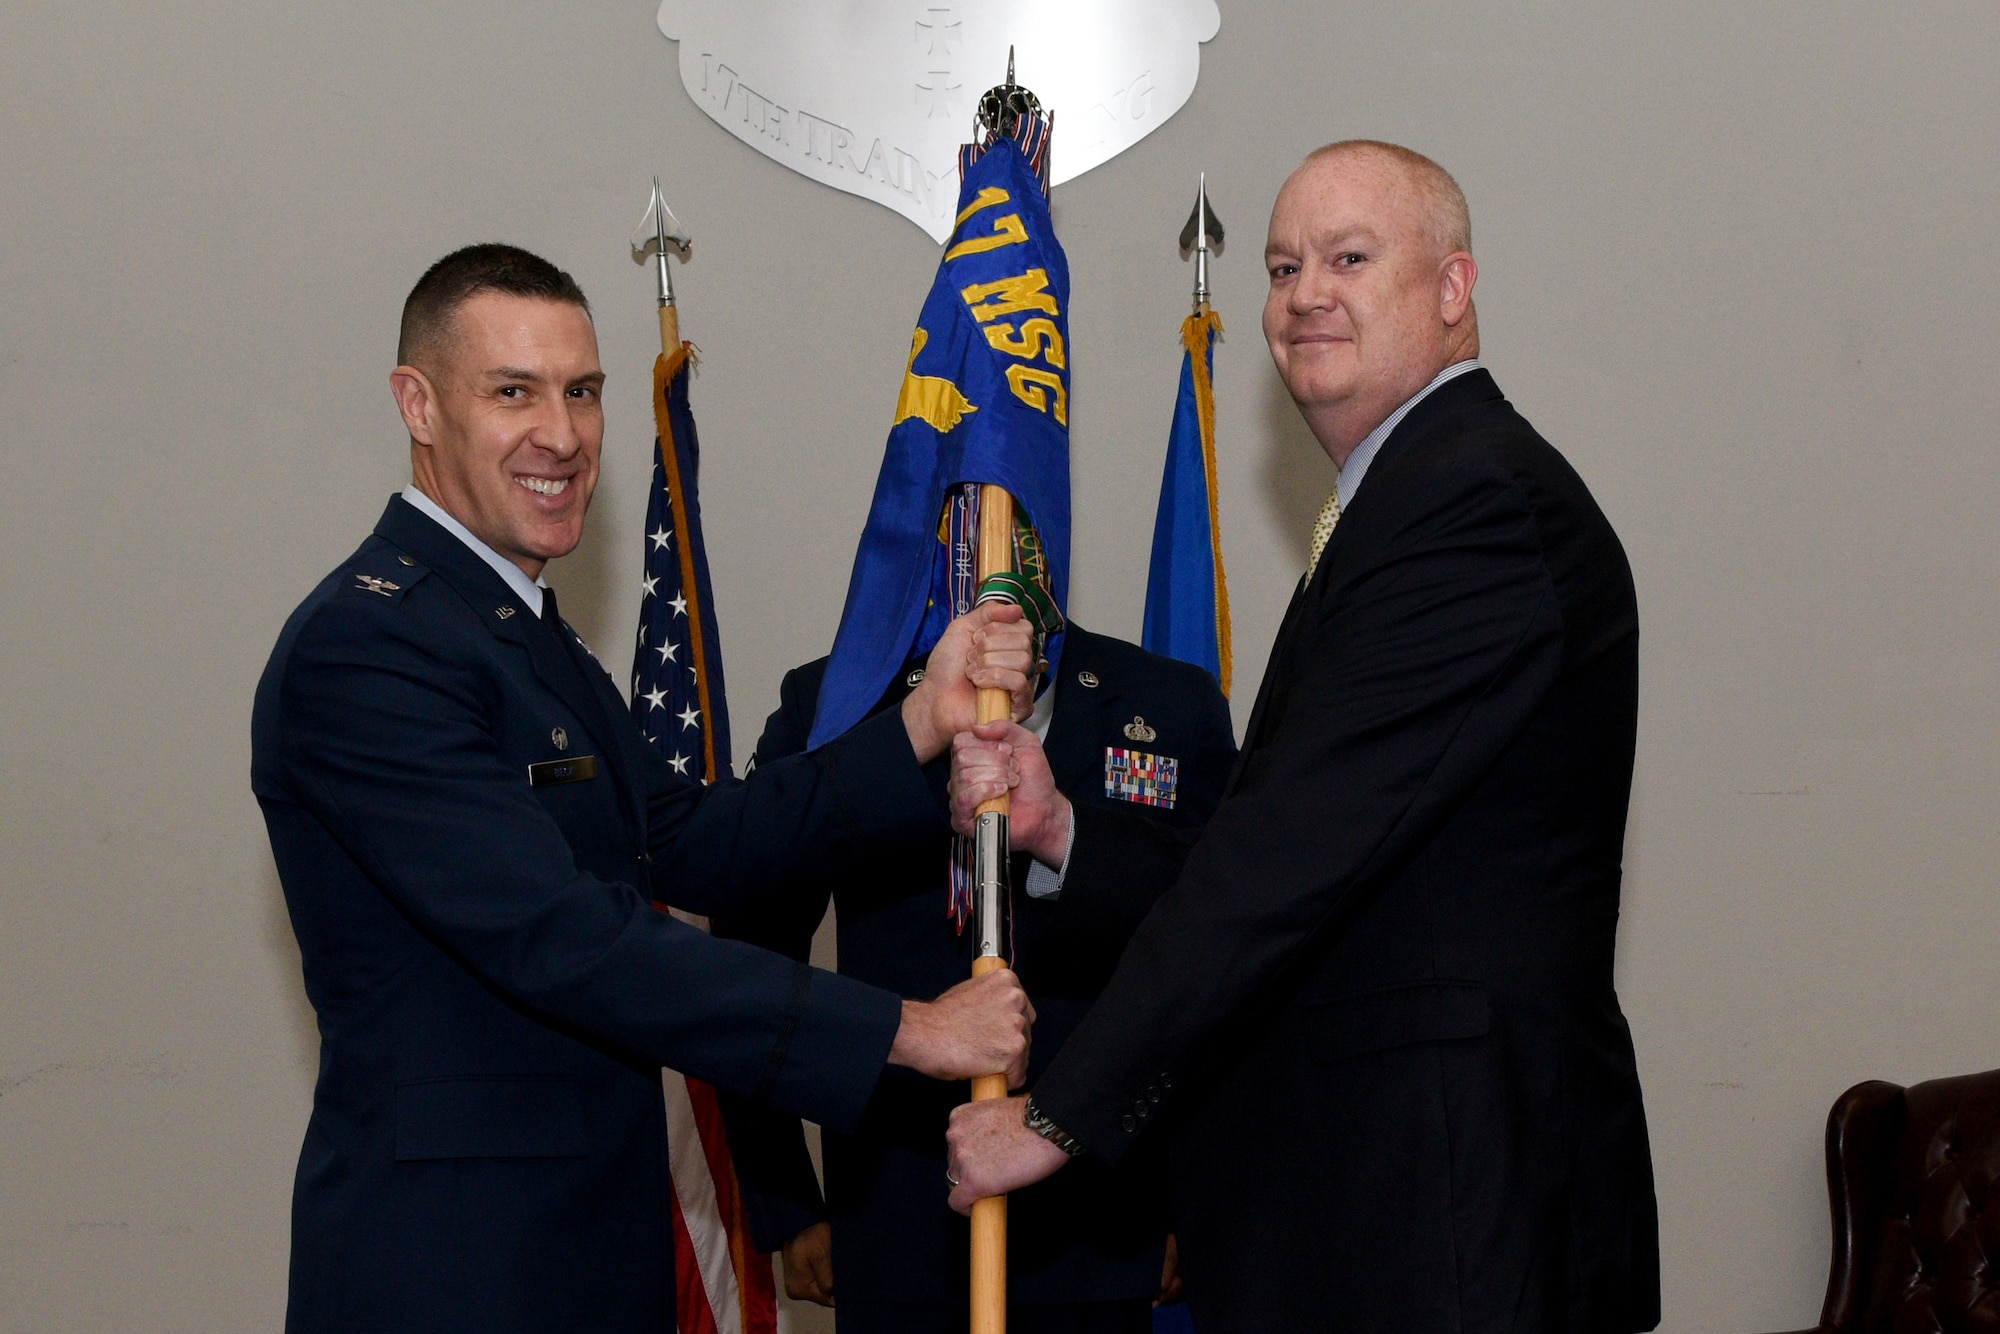 U.S. Air Force Col. Jason Beck, 17th Mission Support Group commander, gives the guideon to 17th Force Support Squadron incoming Director William Dowell, during the 17th FSS assumption of leadership at the Event Center on Goodfellow Air Force Base, Texas, October 19, 2018. The assumption of leadership ceremony is a time honored military tradition that signifies the orderly transfer of authority. (U.S. Air Force photo by Senior Airman Randall Moose/Released)